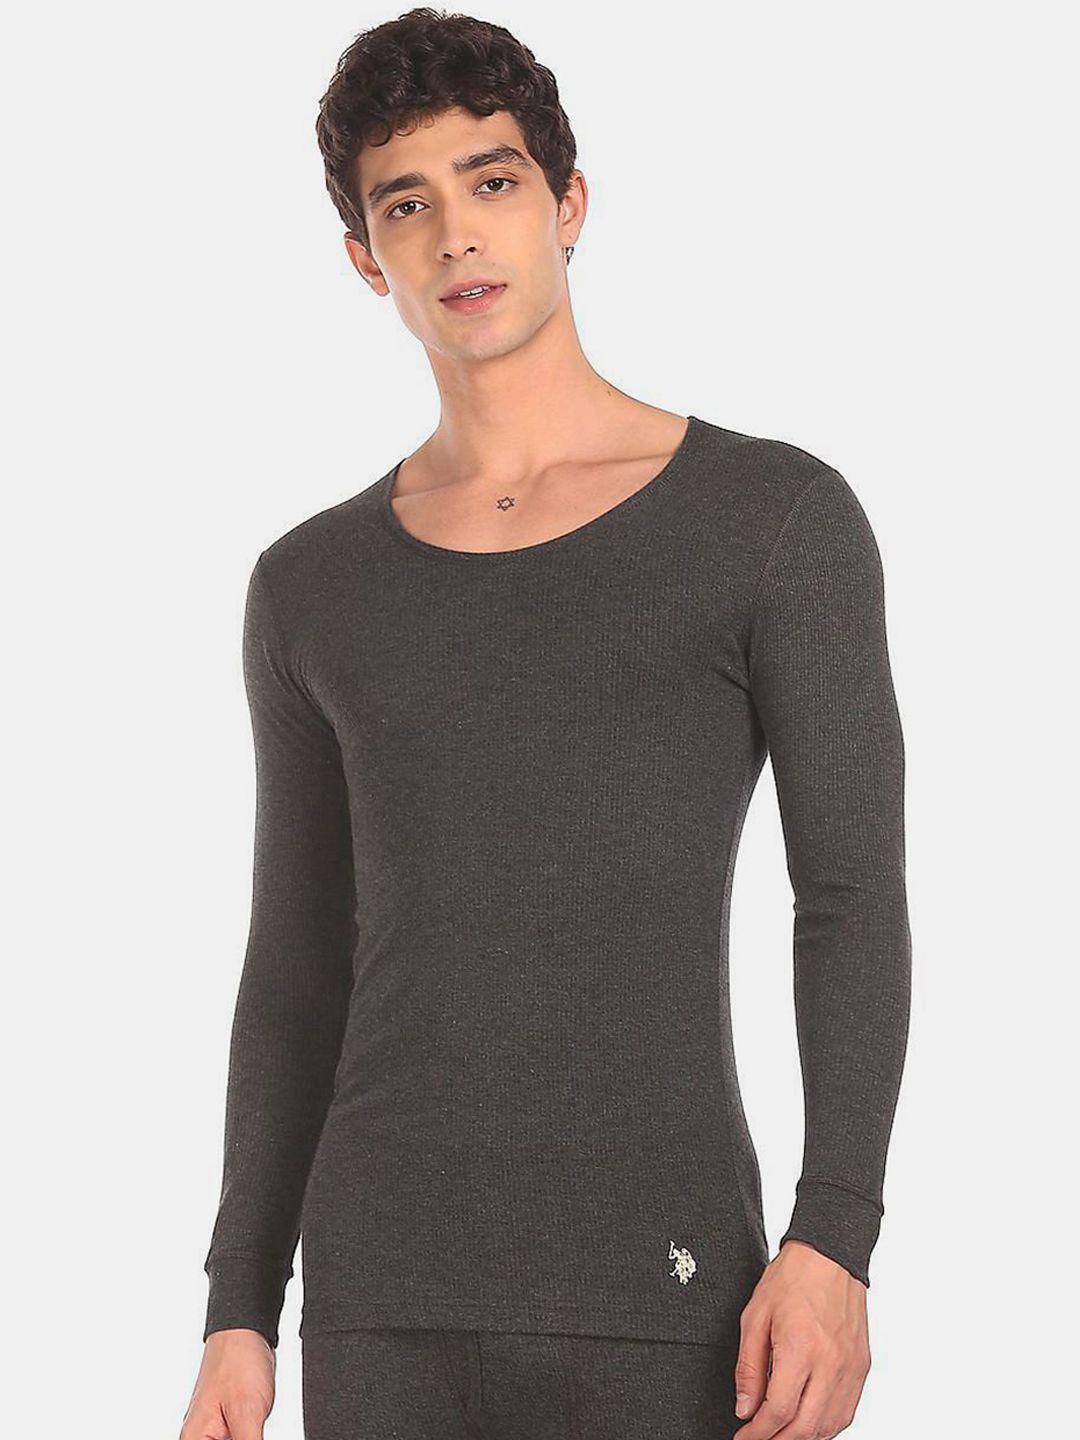 u.s. polo assn. men's charcoal grey solid thermal tops